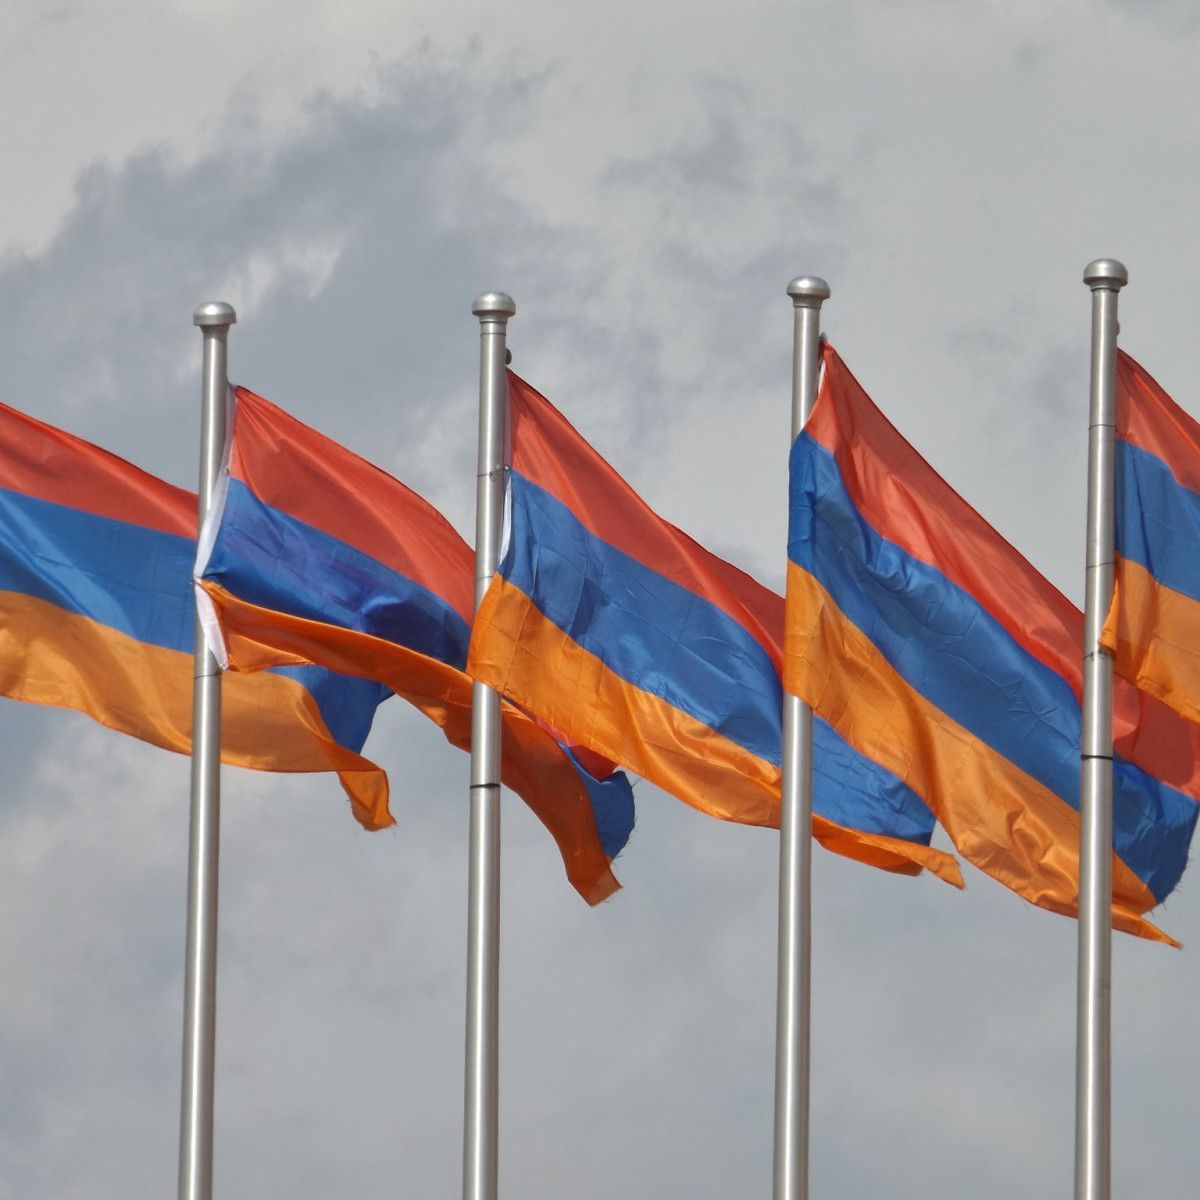 Flag of Armenia, History, Meaning & Symbolism